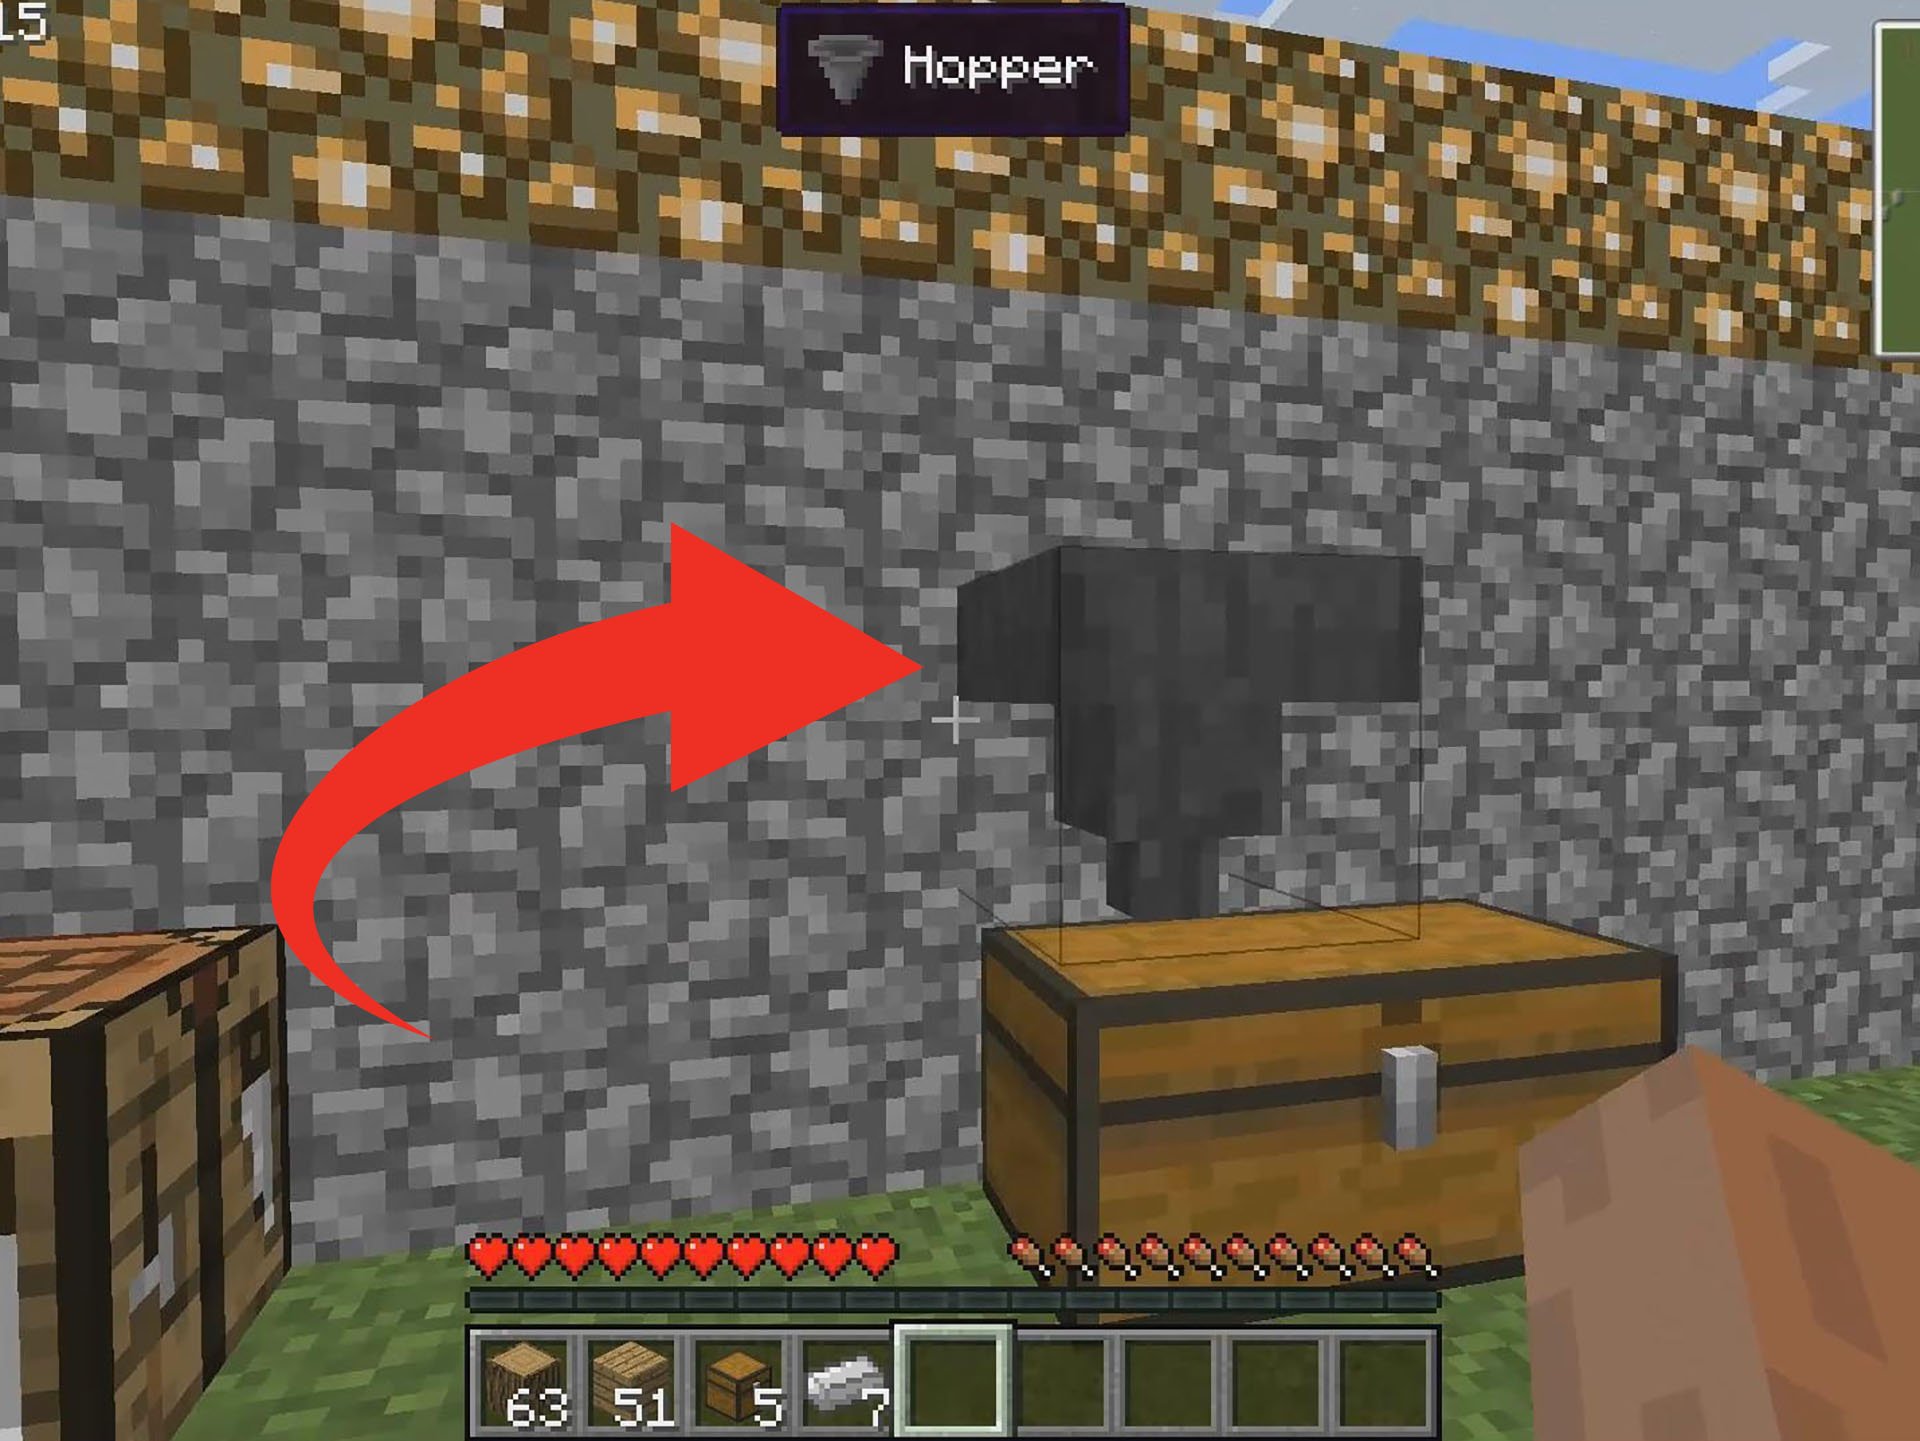 How to Craft a Hopper in Minecraft: 5 Steps (with Pictures)